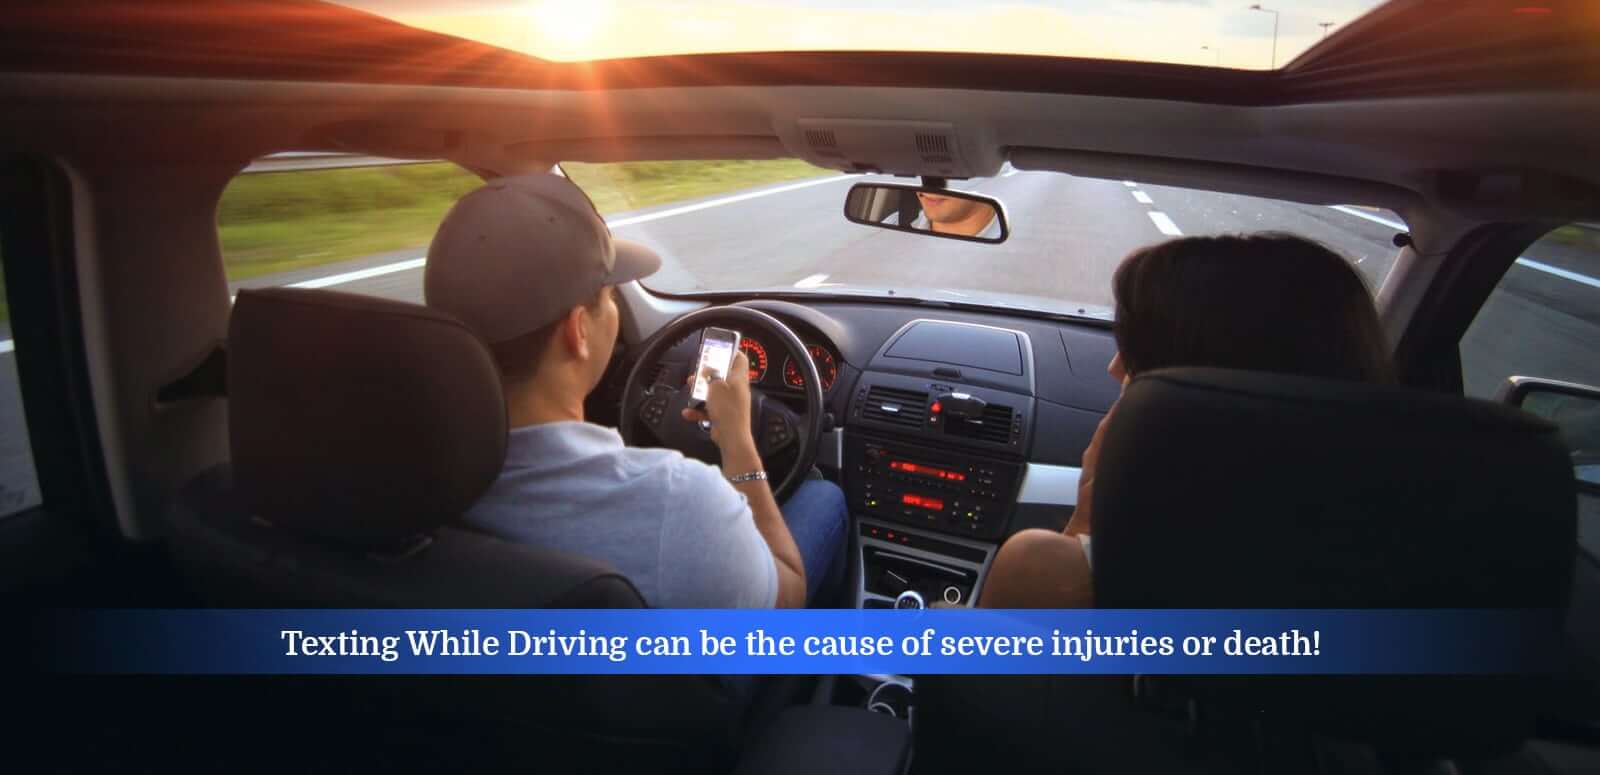  Texting While Driving can be the cause of severe injuries or death!
